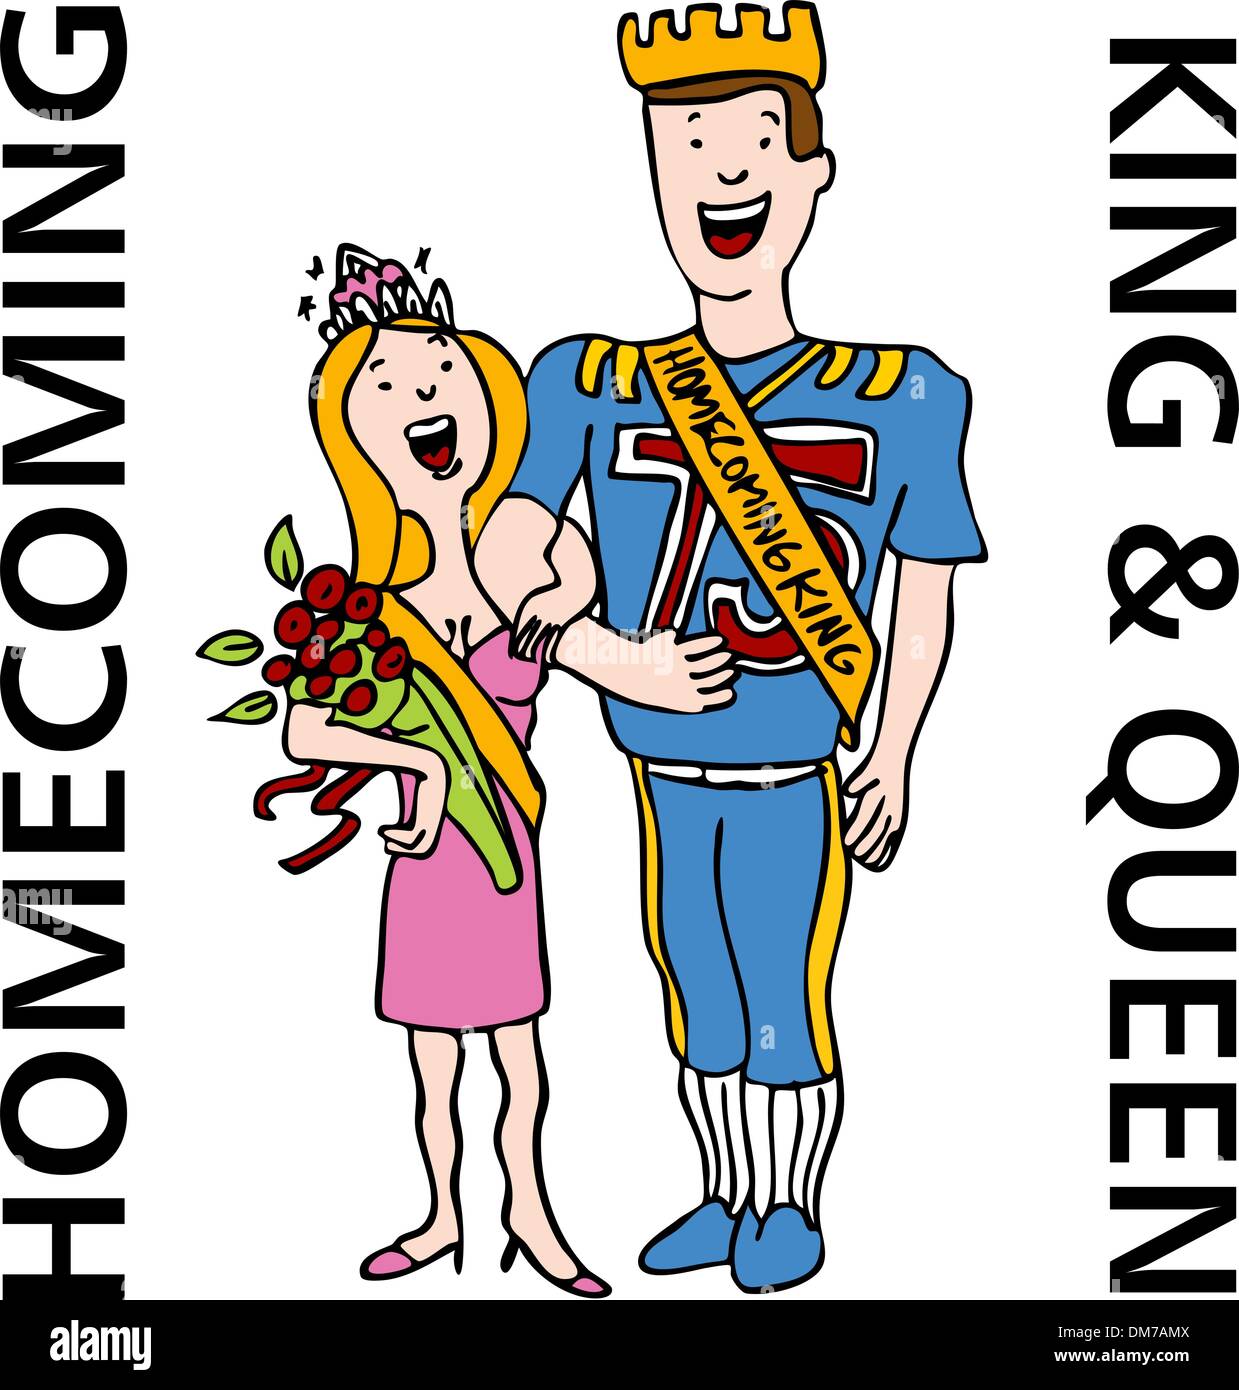 Homecoming King and Queen Stock Vector